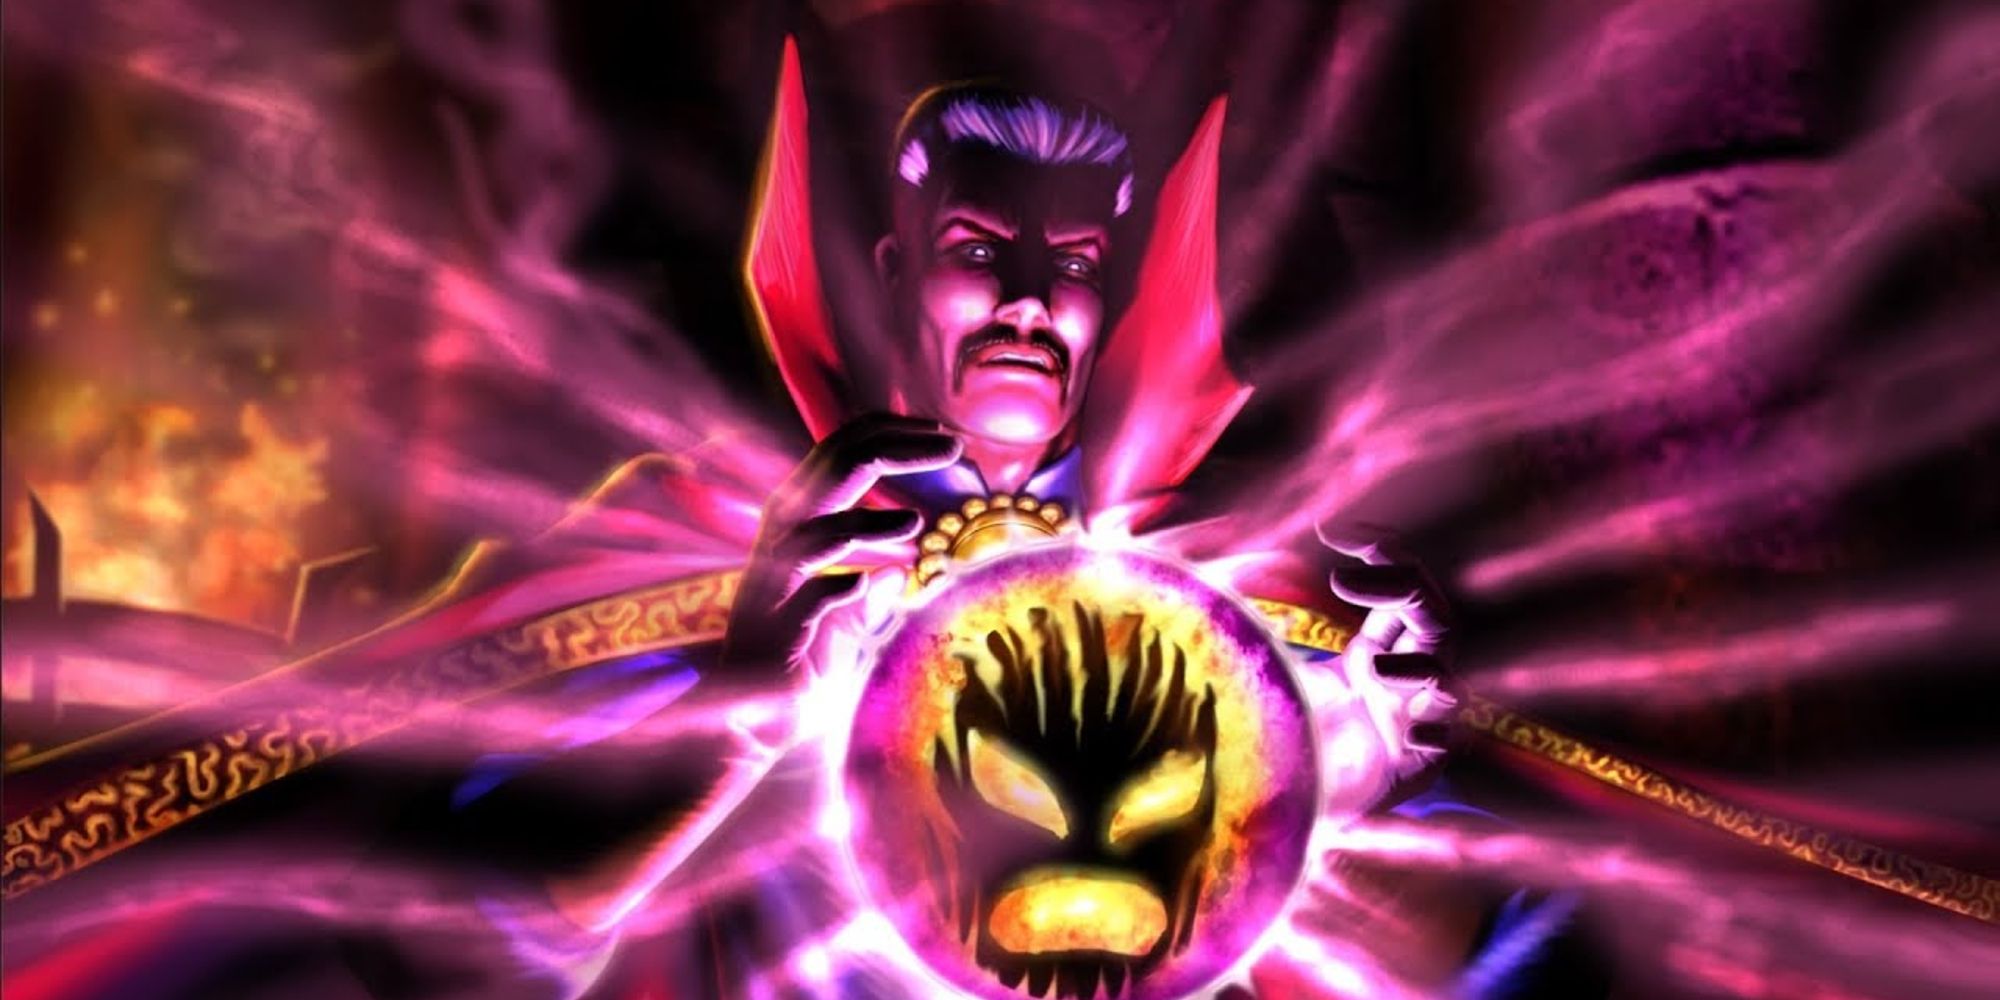 Doctor Strange gazing into a crystal bomb containing Dormammu in Ultimate Alliance